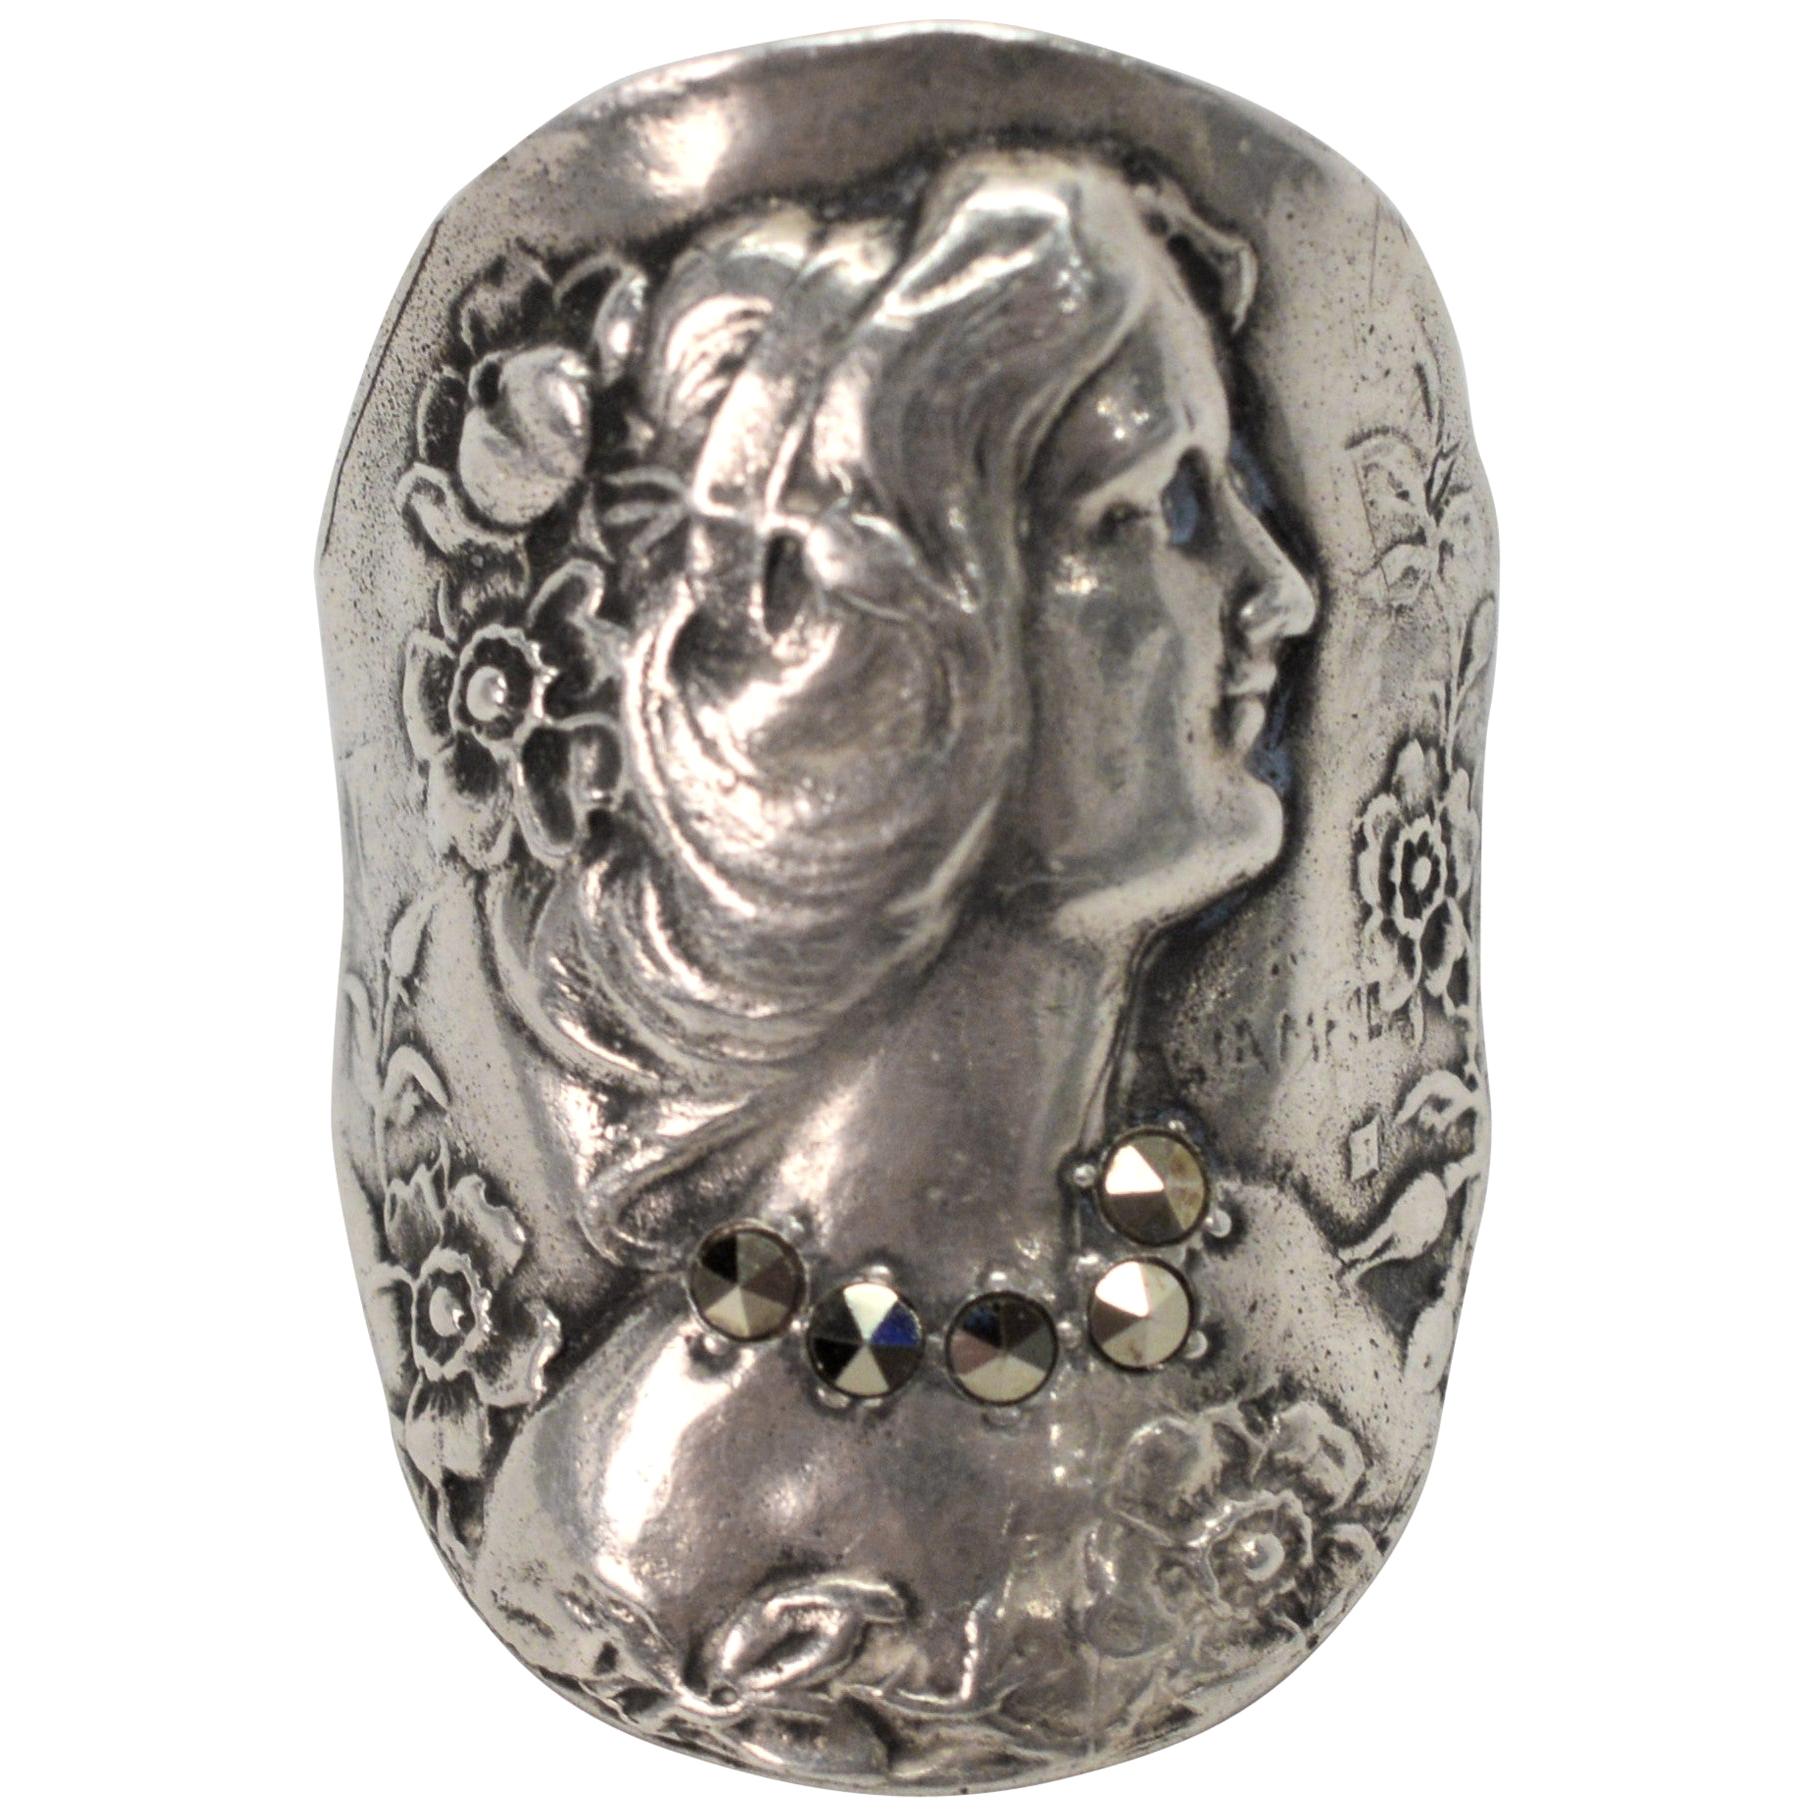 Antique Art Deco Sterling Silver Bust Ring